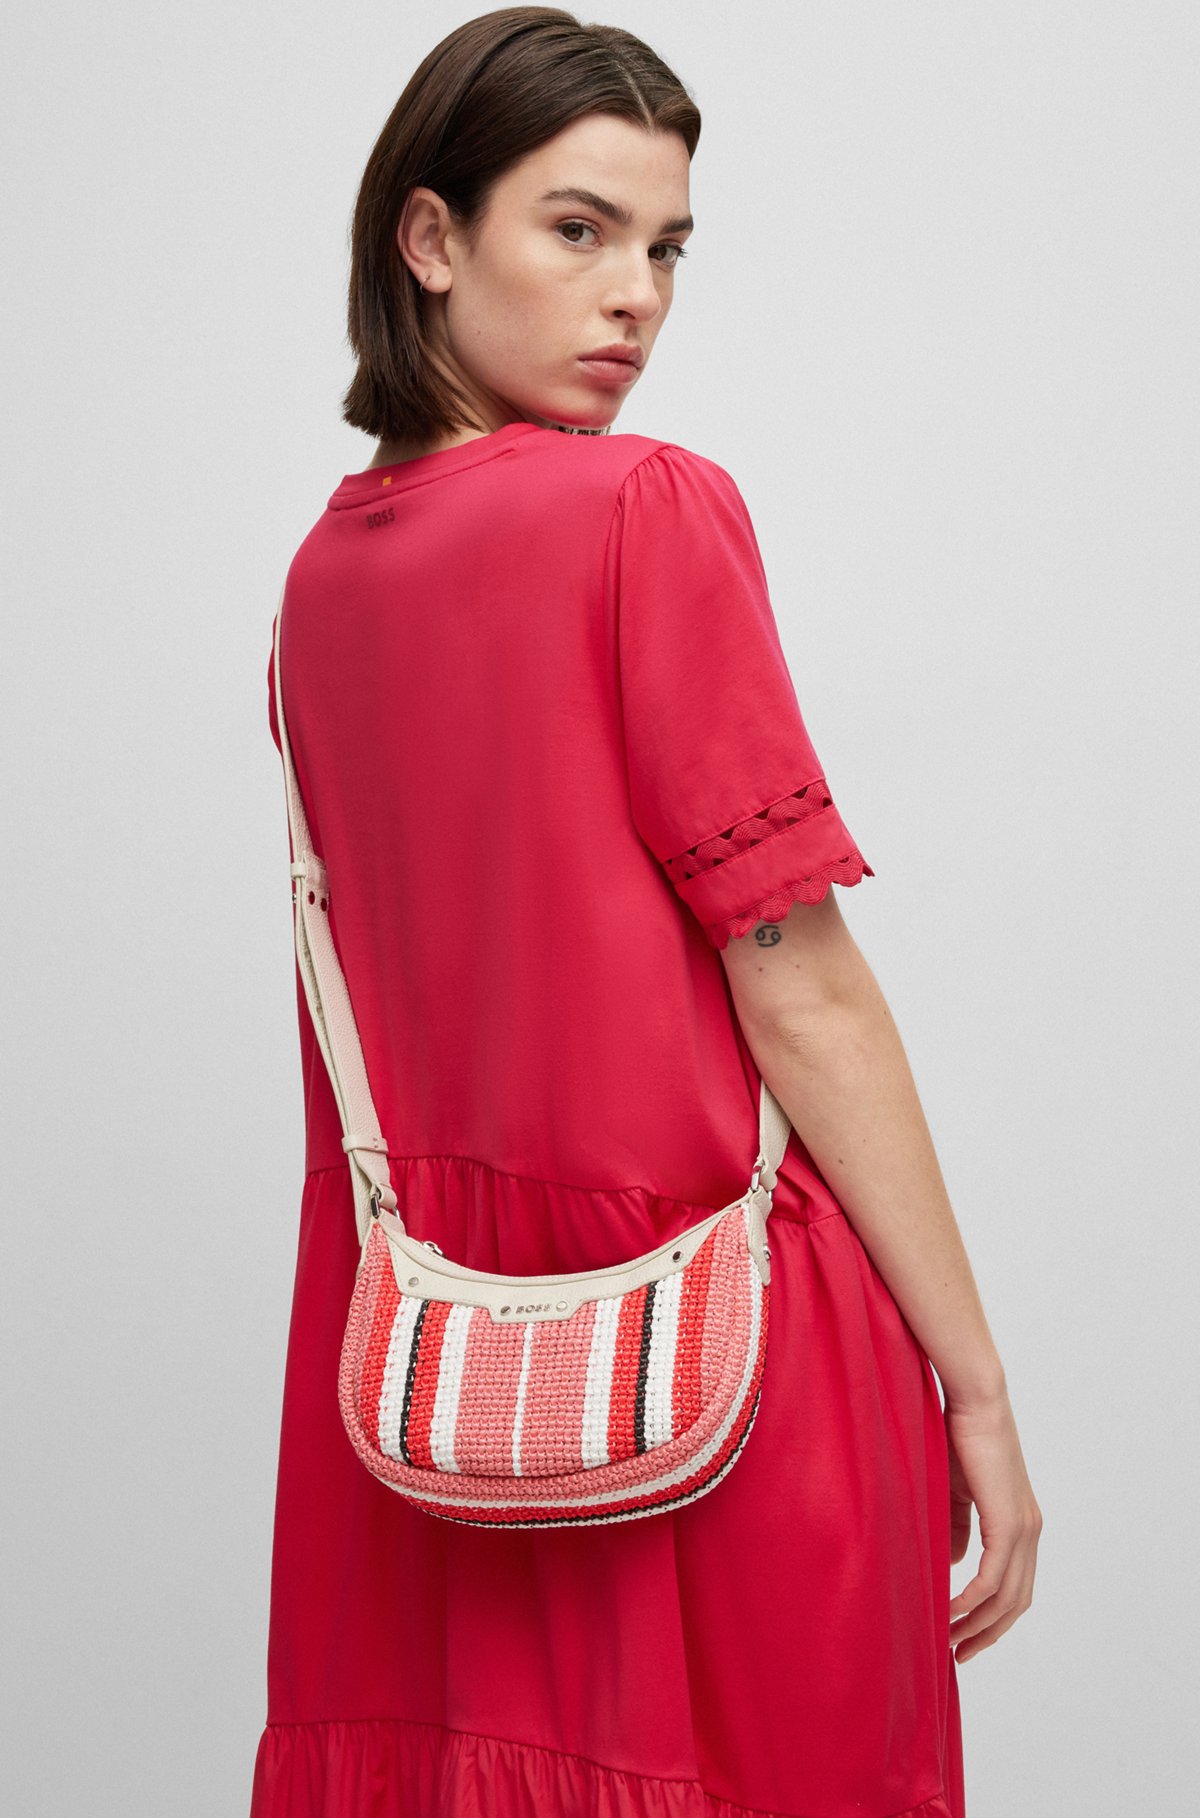 Leather-trimmed crossbody bag in multi-colored raffia, Pink